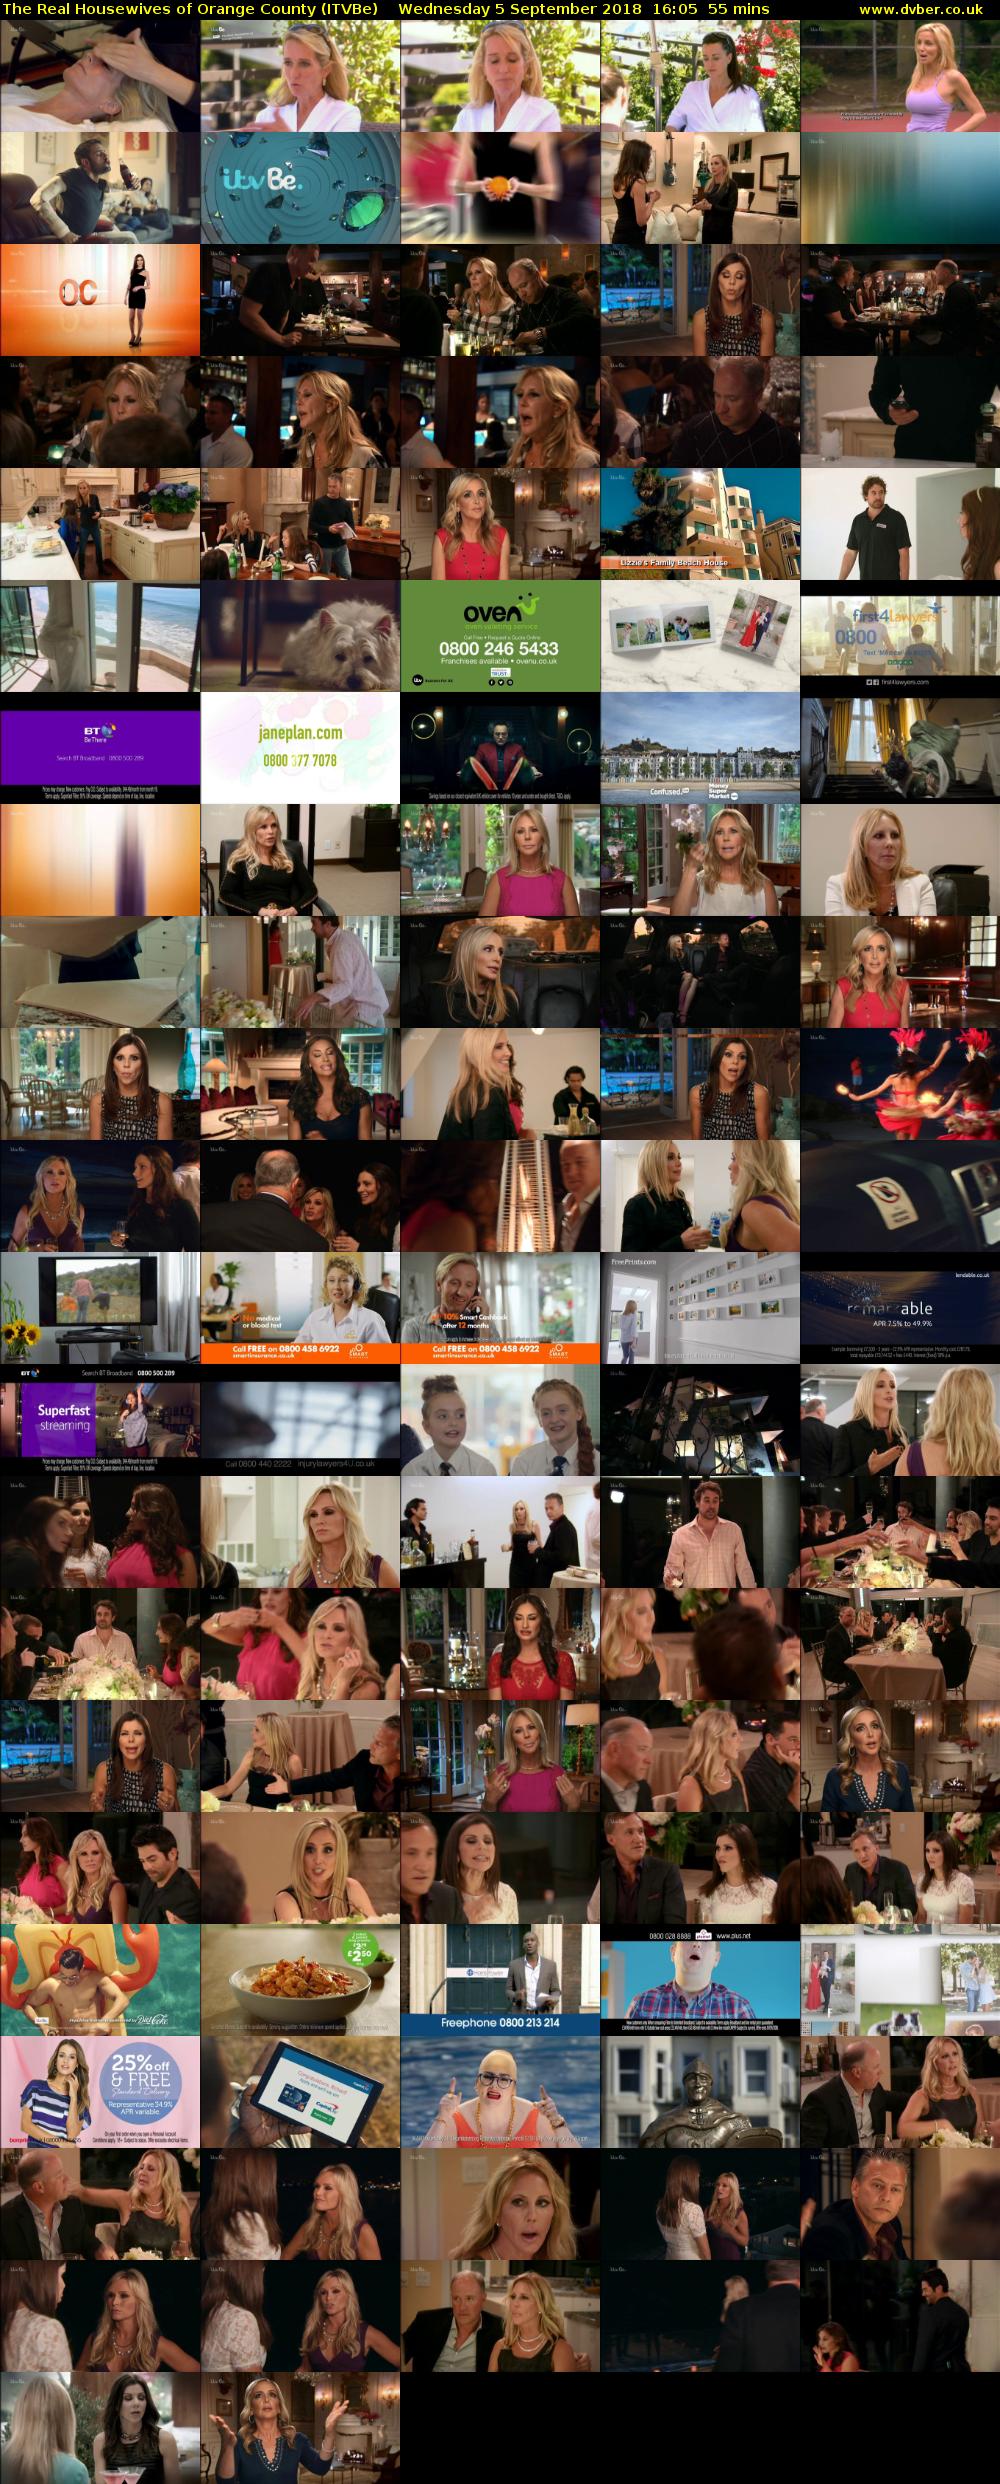 The Real Housewives of Orange County (ITVBe) Wednesday 5 September 2018 16:05 - 17:00